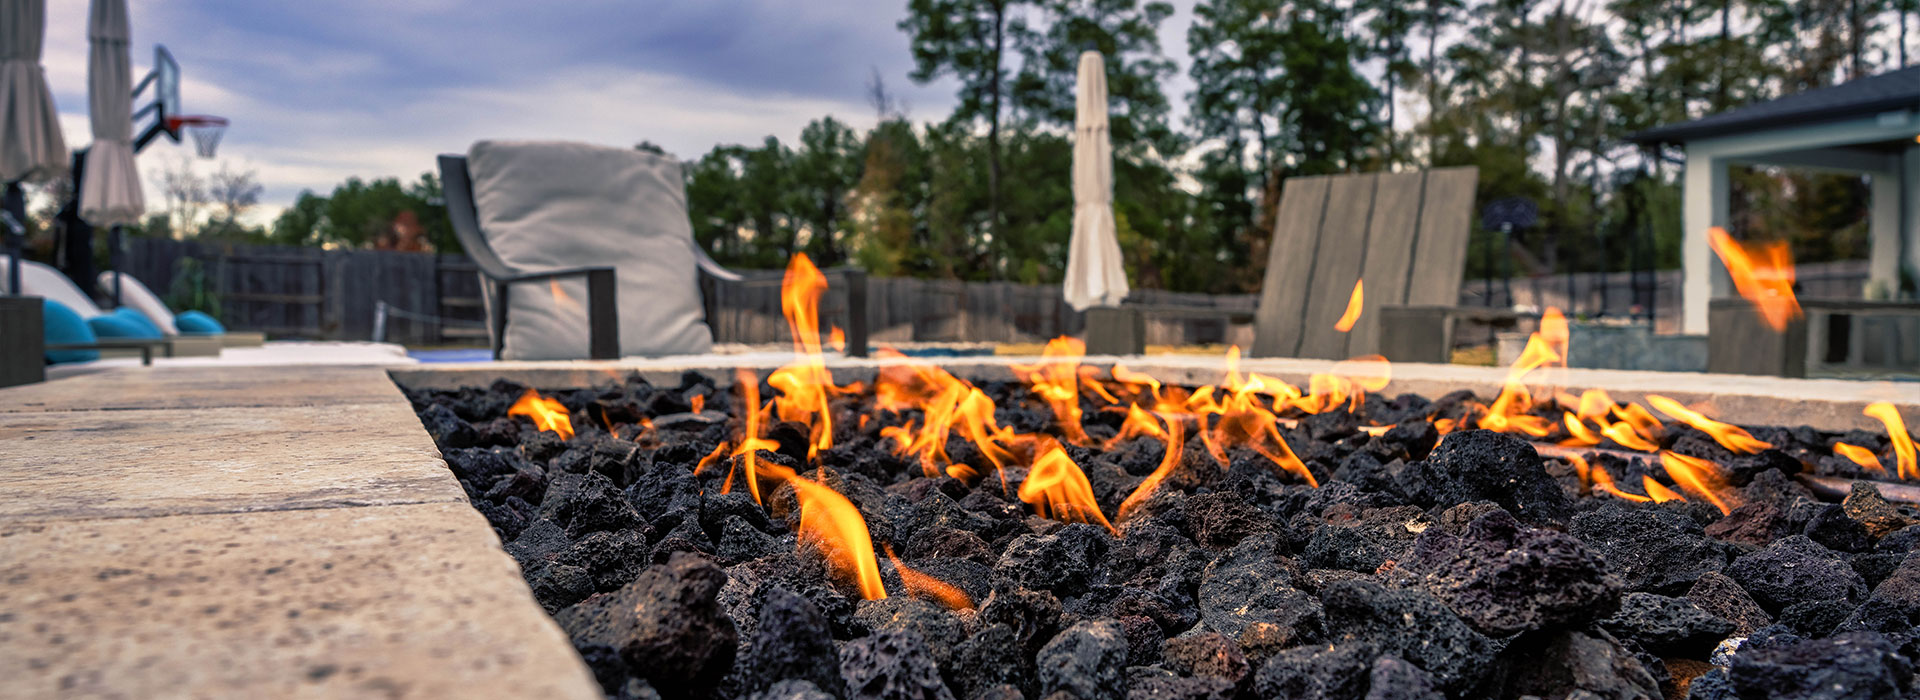 Best Custom Outdoor Fireplaces In Houston and Best Custom Outdoor Fire Pits In Houston